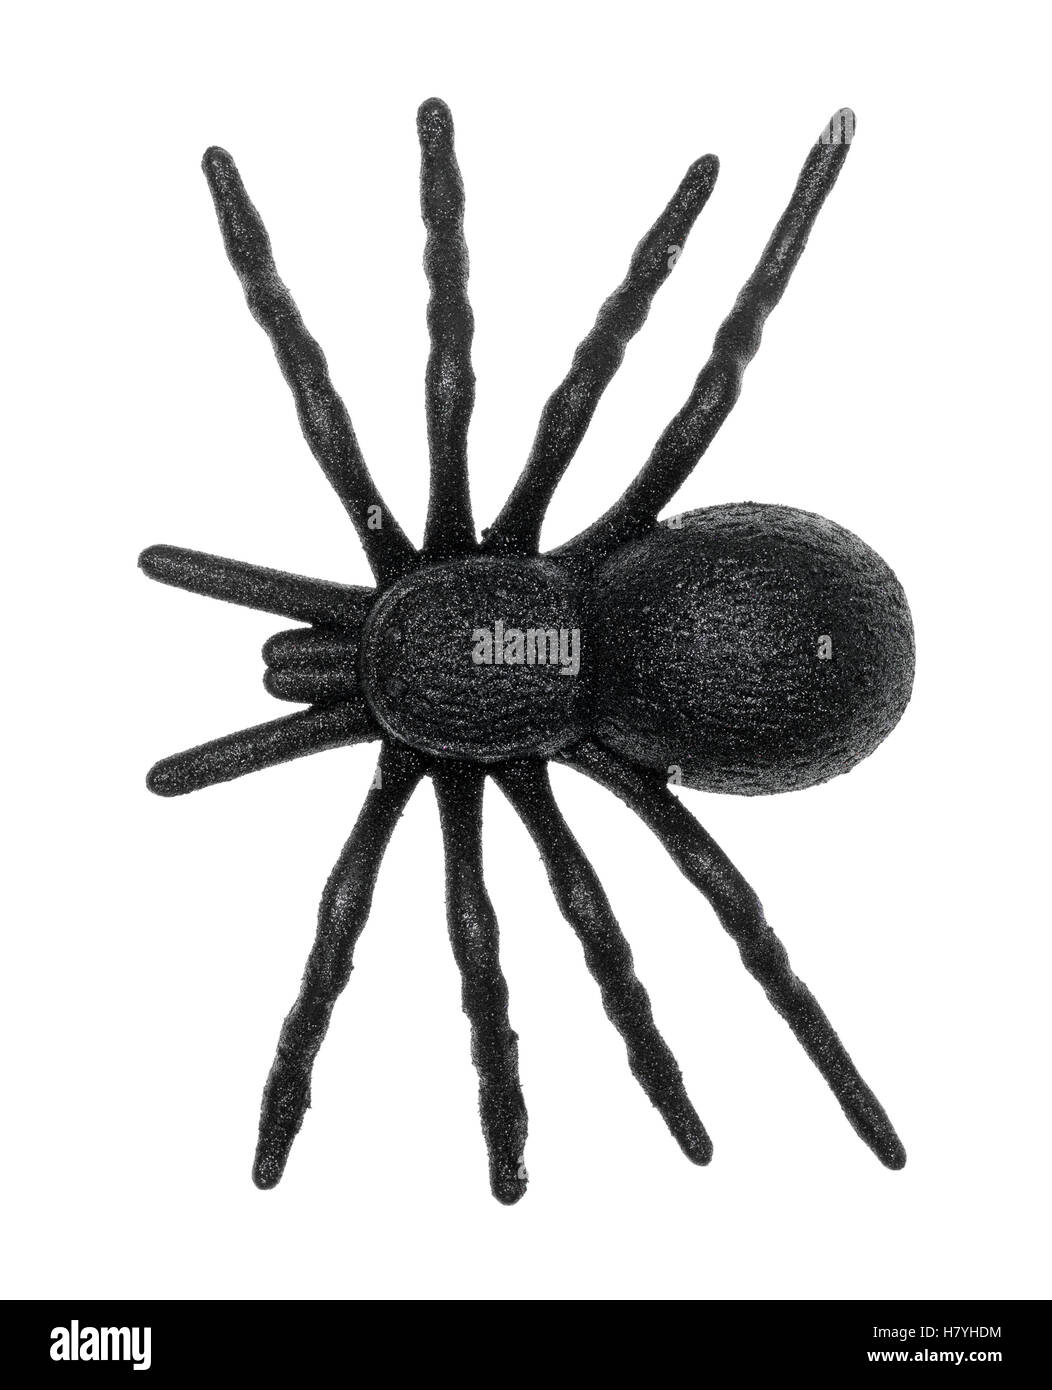 Top view of a plastic toy spider isolated on a white background. Stock Photo